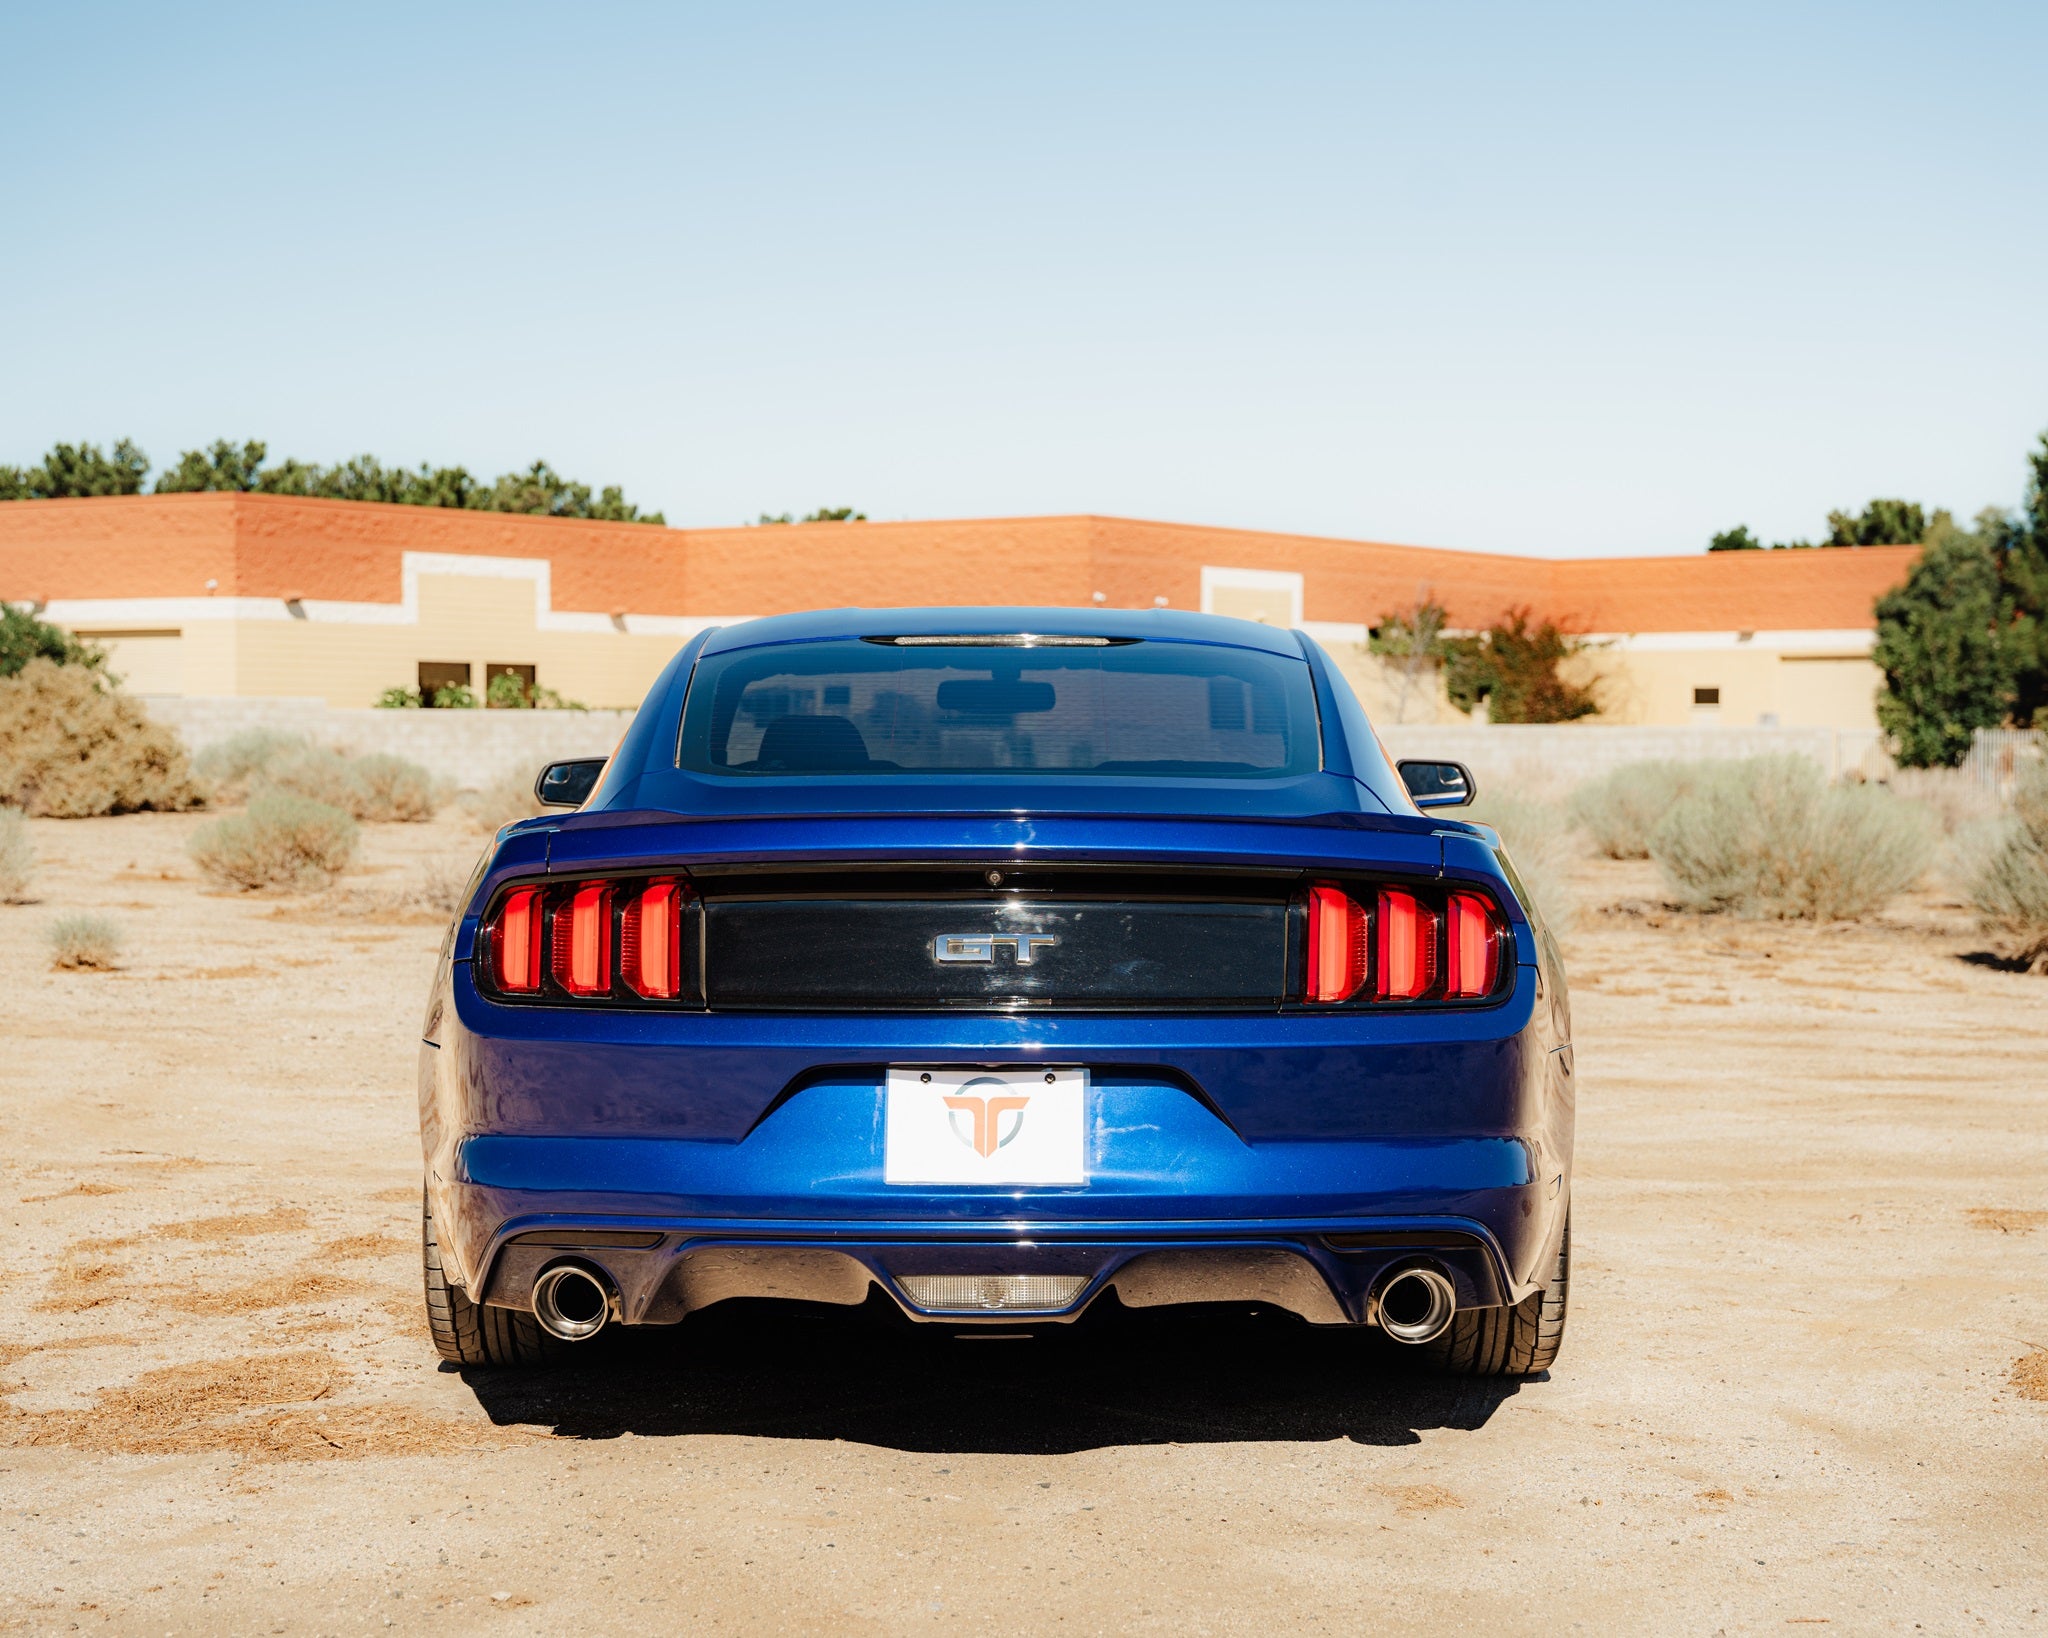 2015-2017 Ford Mustang 5.0L GT Fastback - 3" Catback Exhaust With Polished Tips